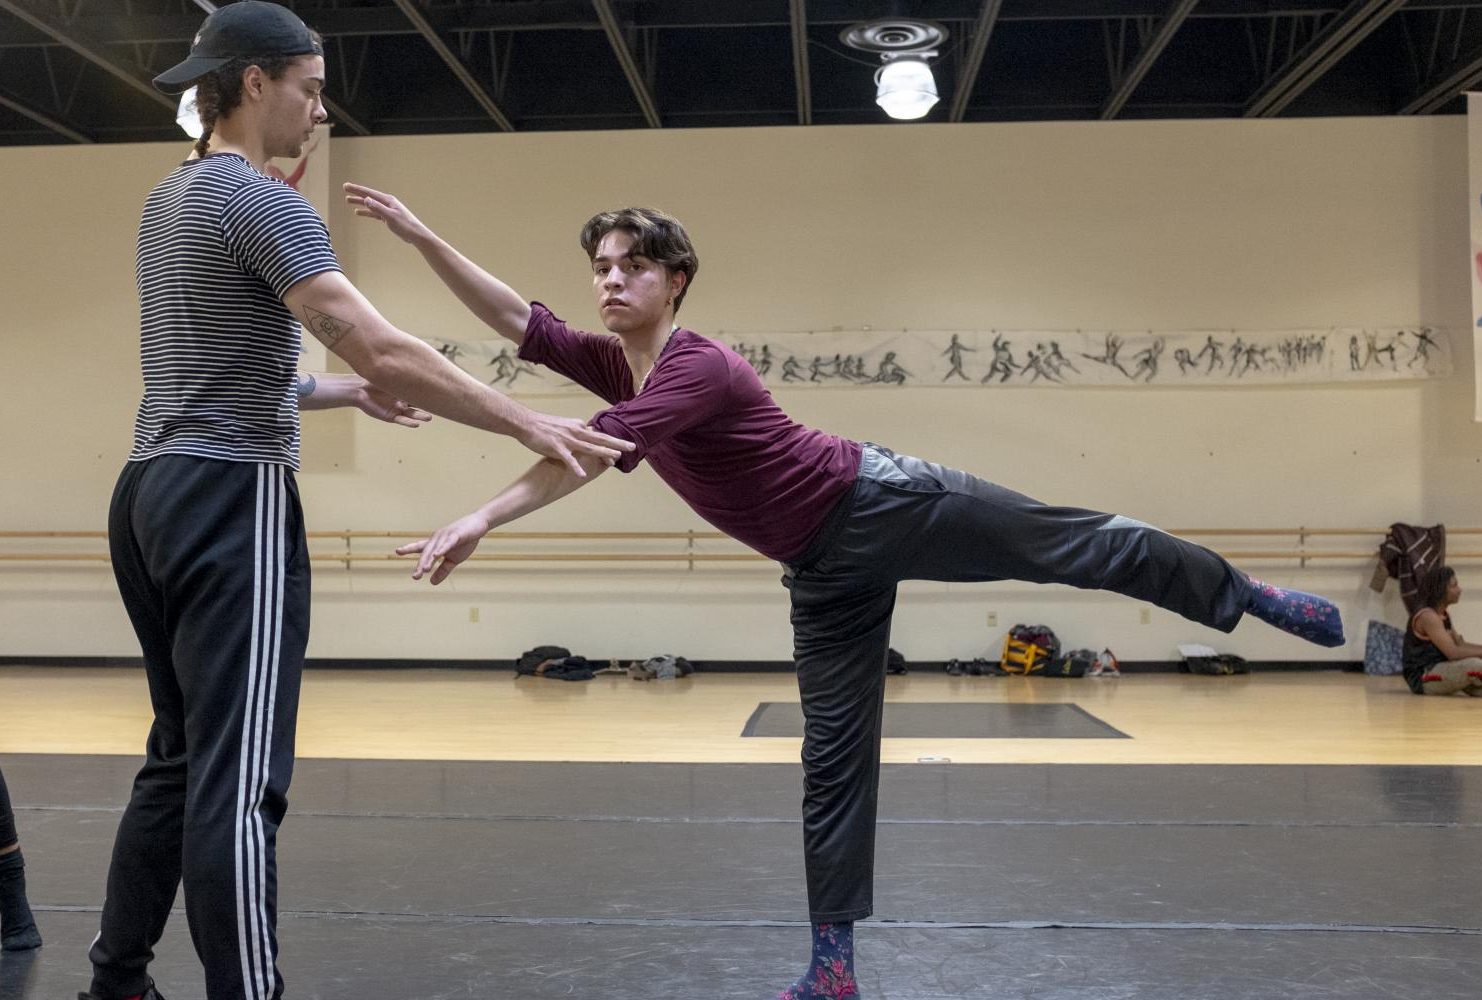 Is Foss assists fellow dance student José-Antonio Gomez as he practices his form during his warm-up in Dance Production: Studio and Stage class at American River College, on Feb. 6, 2019. Gomez is a firstyear student in the dance program. (Photo by Patrick Hyun Wilson)